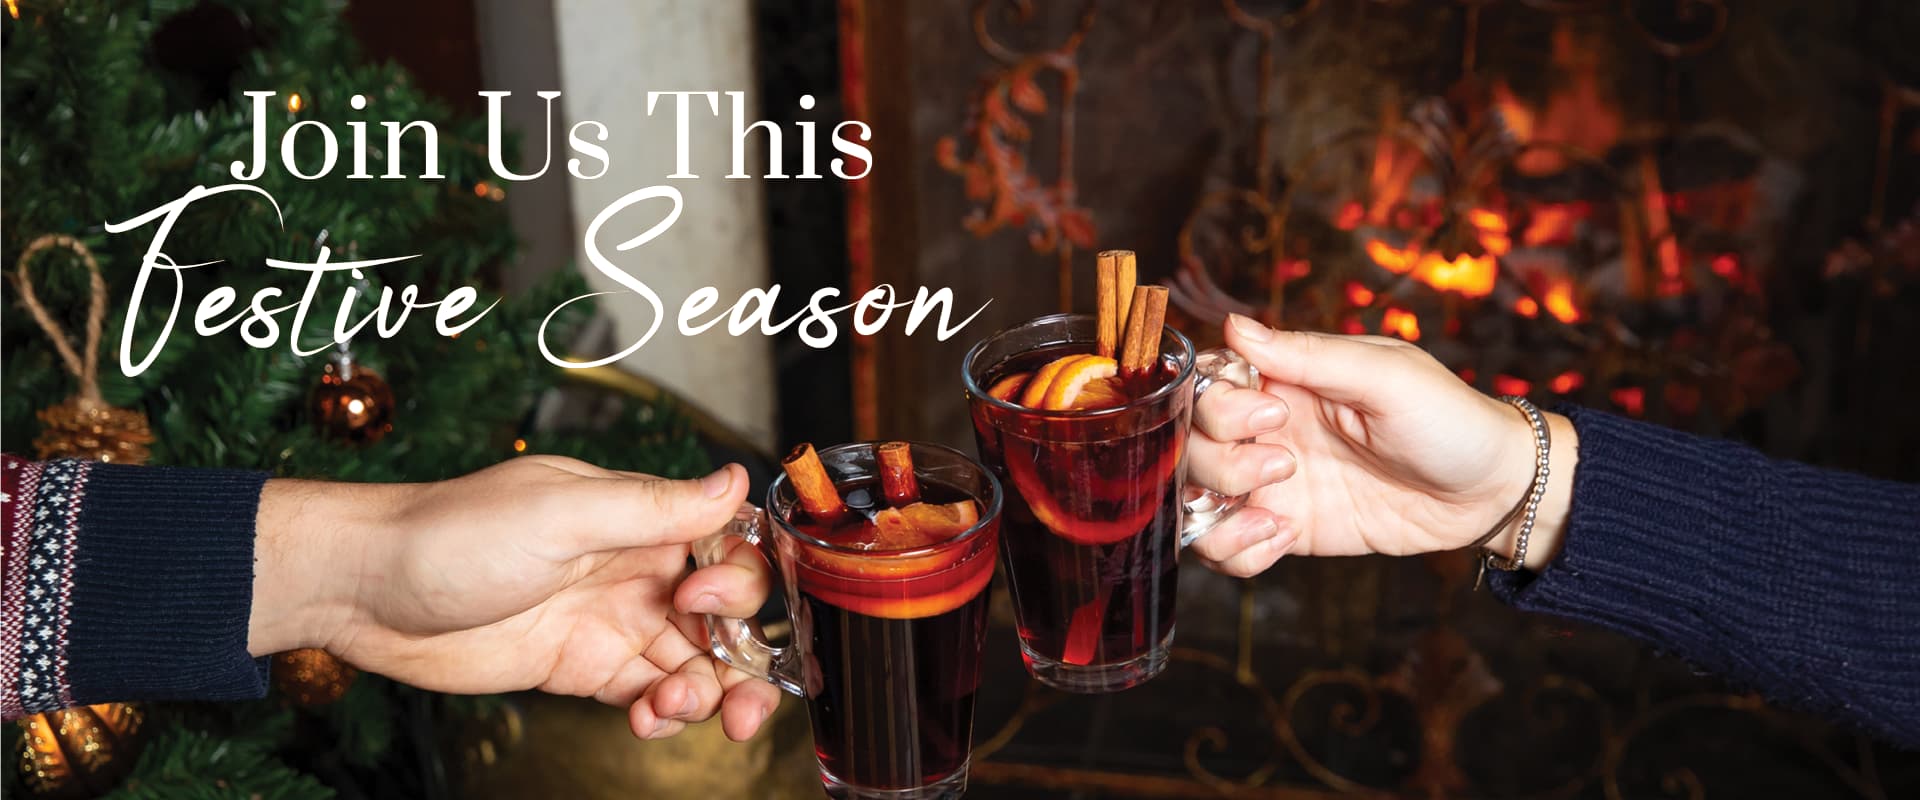 join us this festive season at Pen & Wig | Mulled Wine